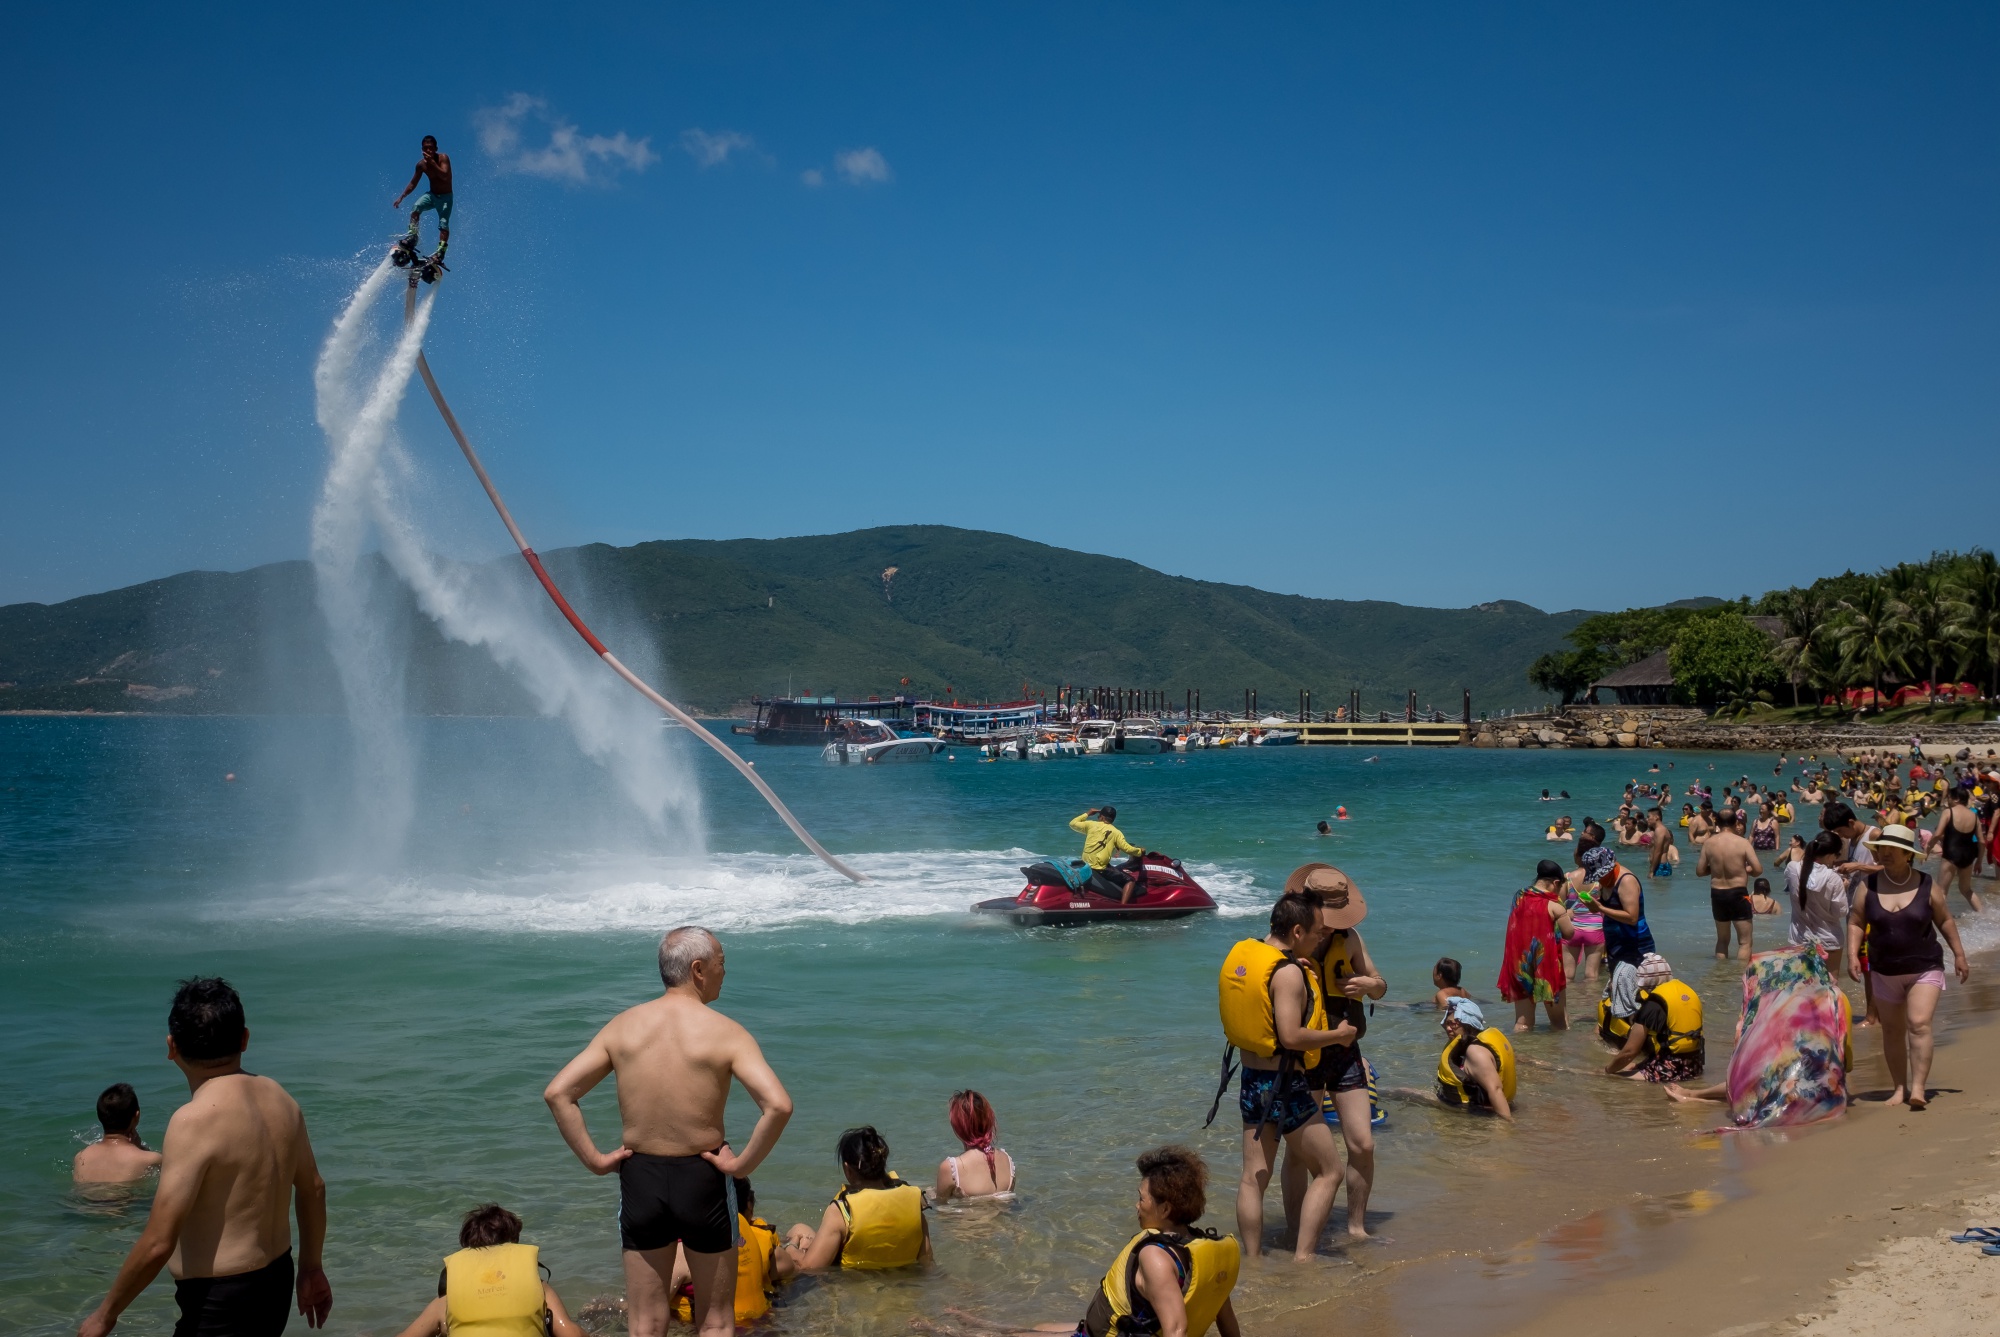 Chinese tourists watch the flyboard show by the beach of Hon Tam Resort in Nha Trang, Vietnam.